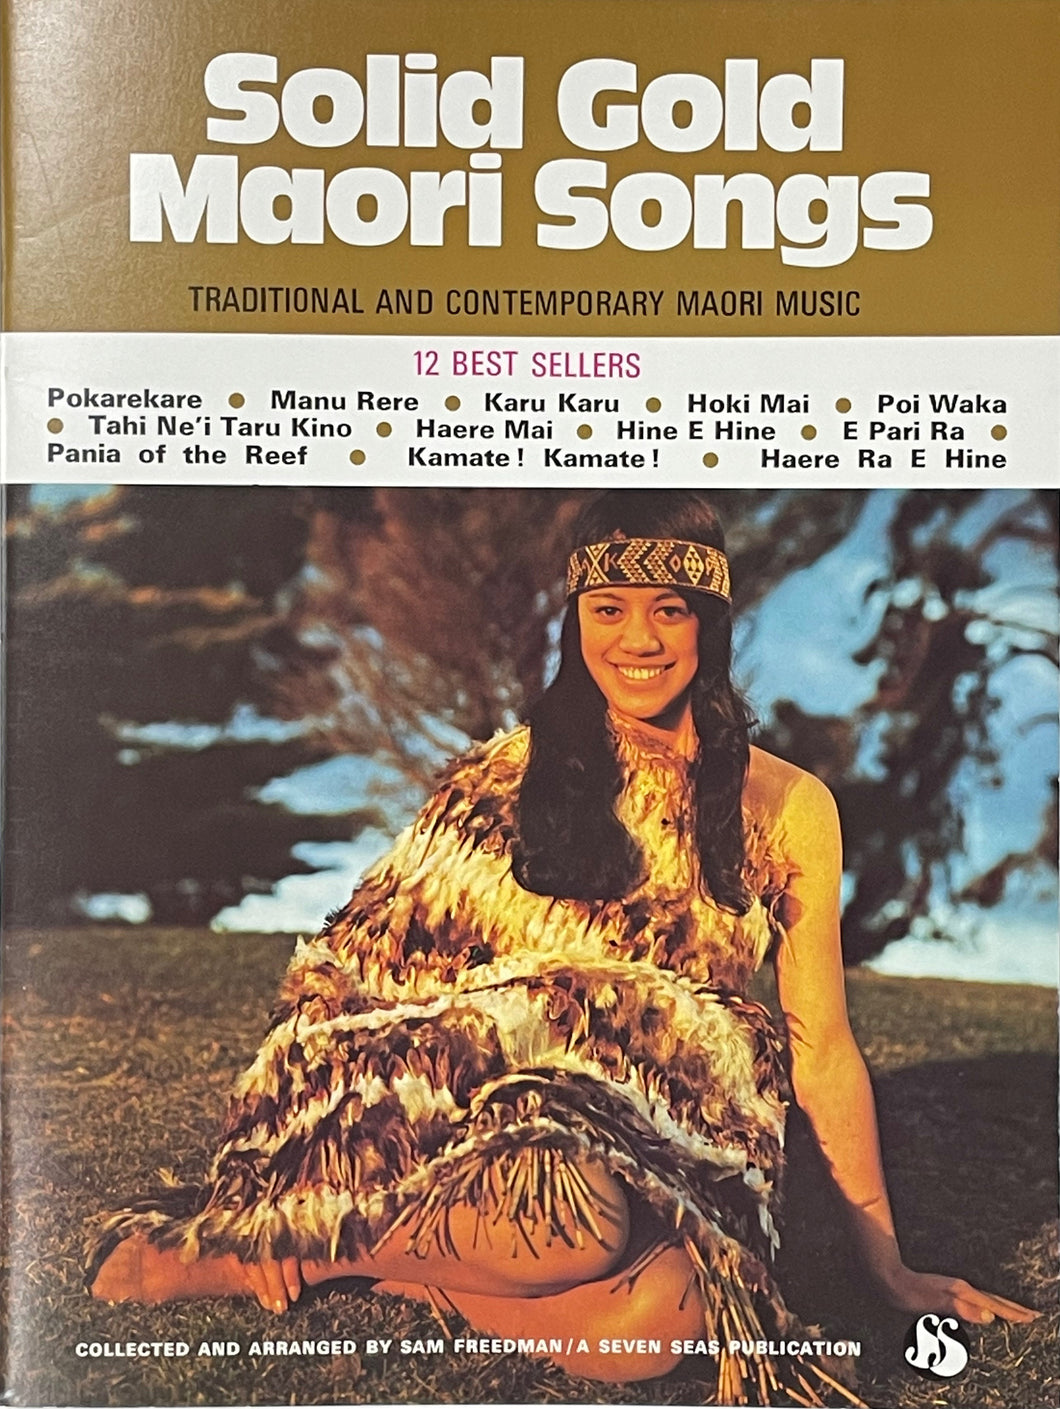 Solid Gold Maori Songs